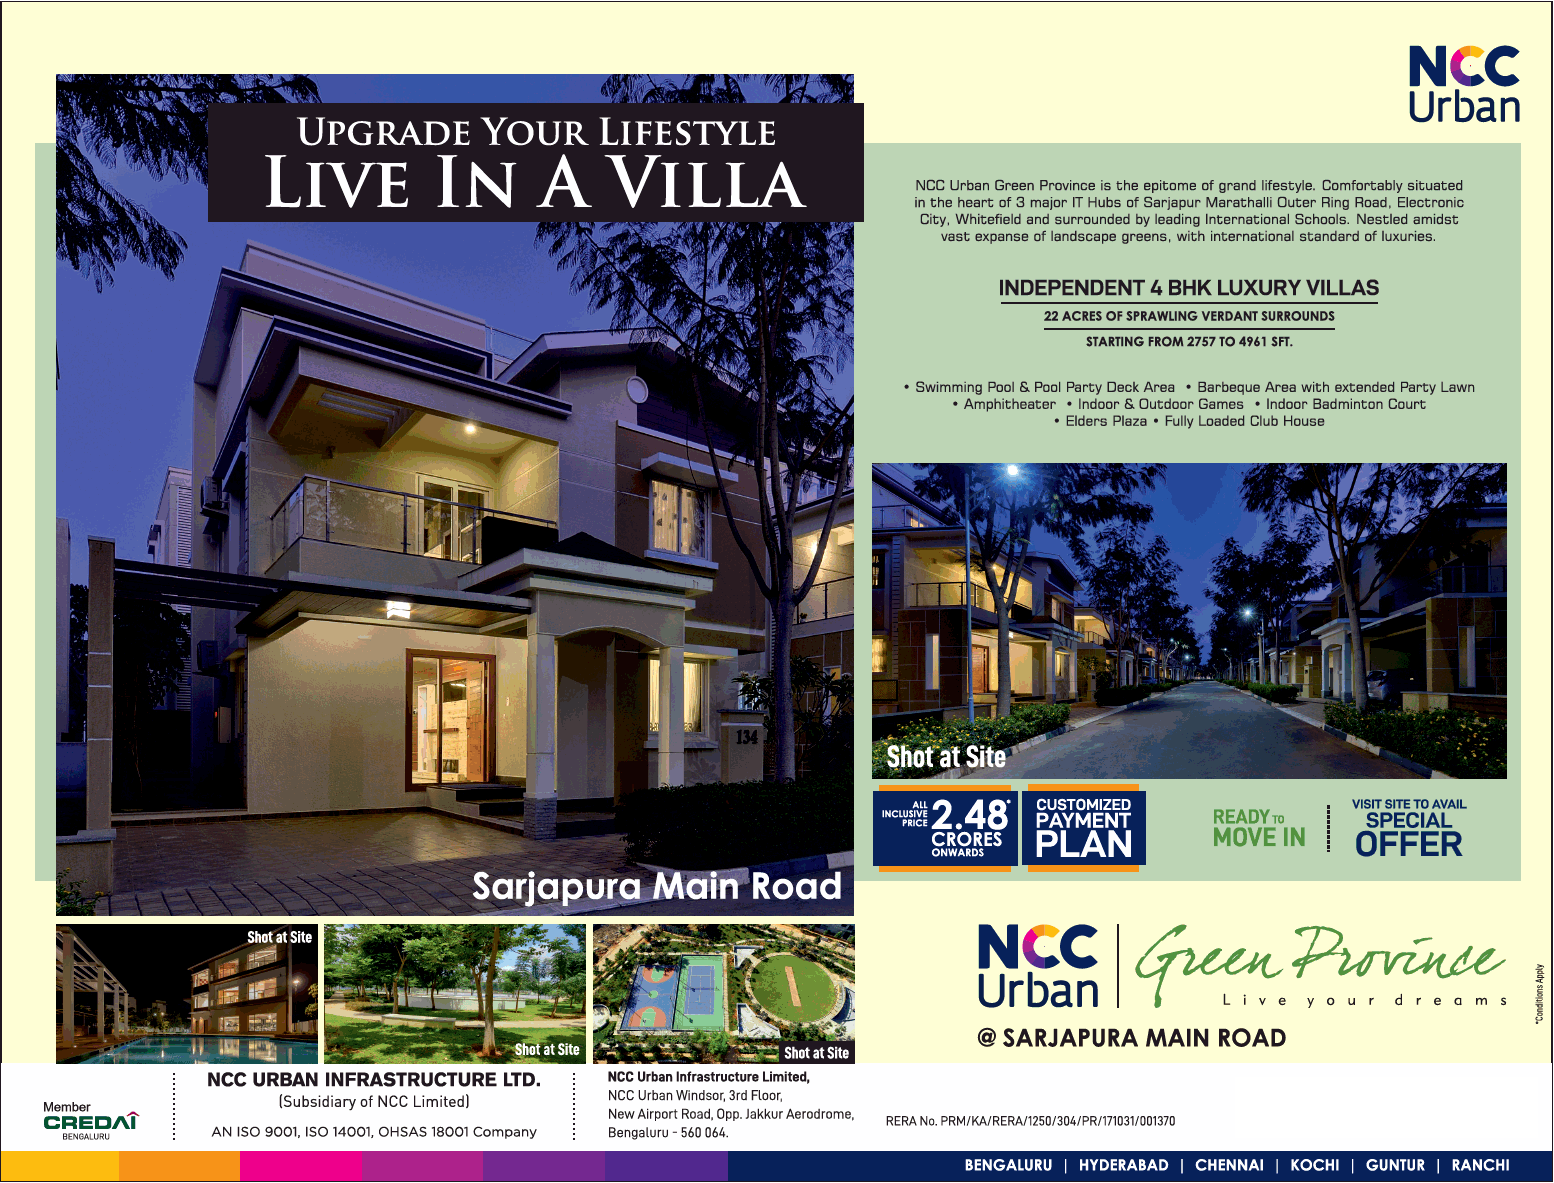 Independent 4 BHK luxury villa at NCC Urban Green Province in Bangalore Update